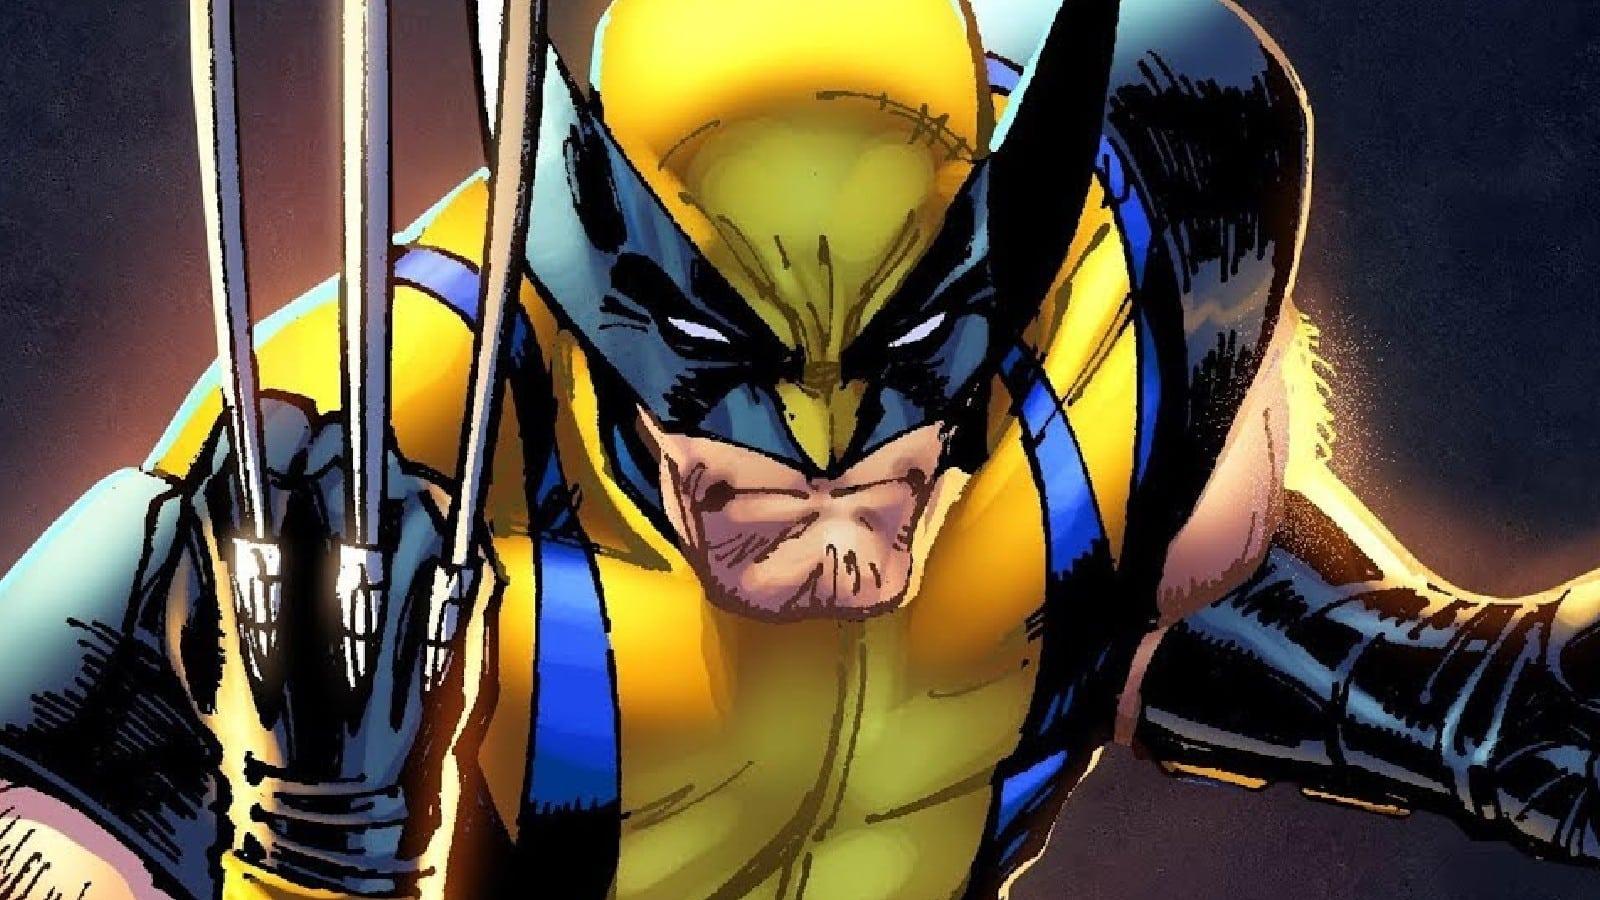 Who would be a good actor to play Wolverine?